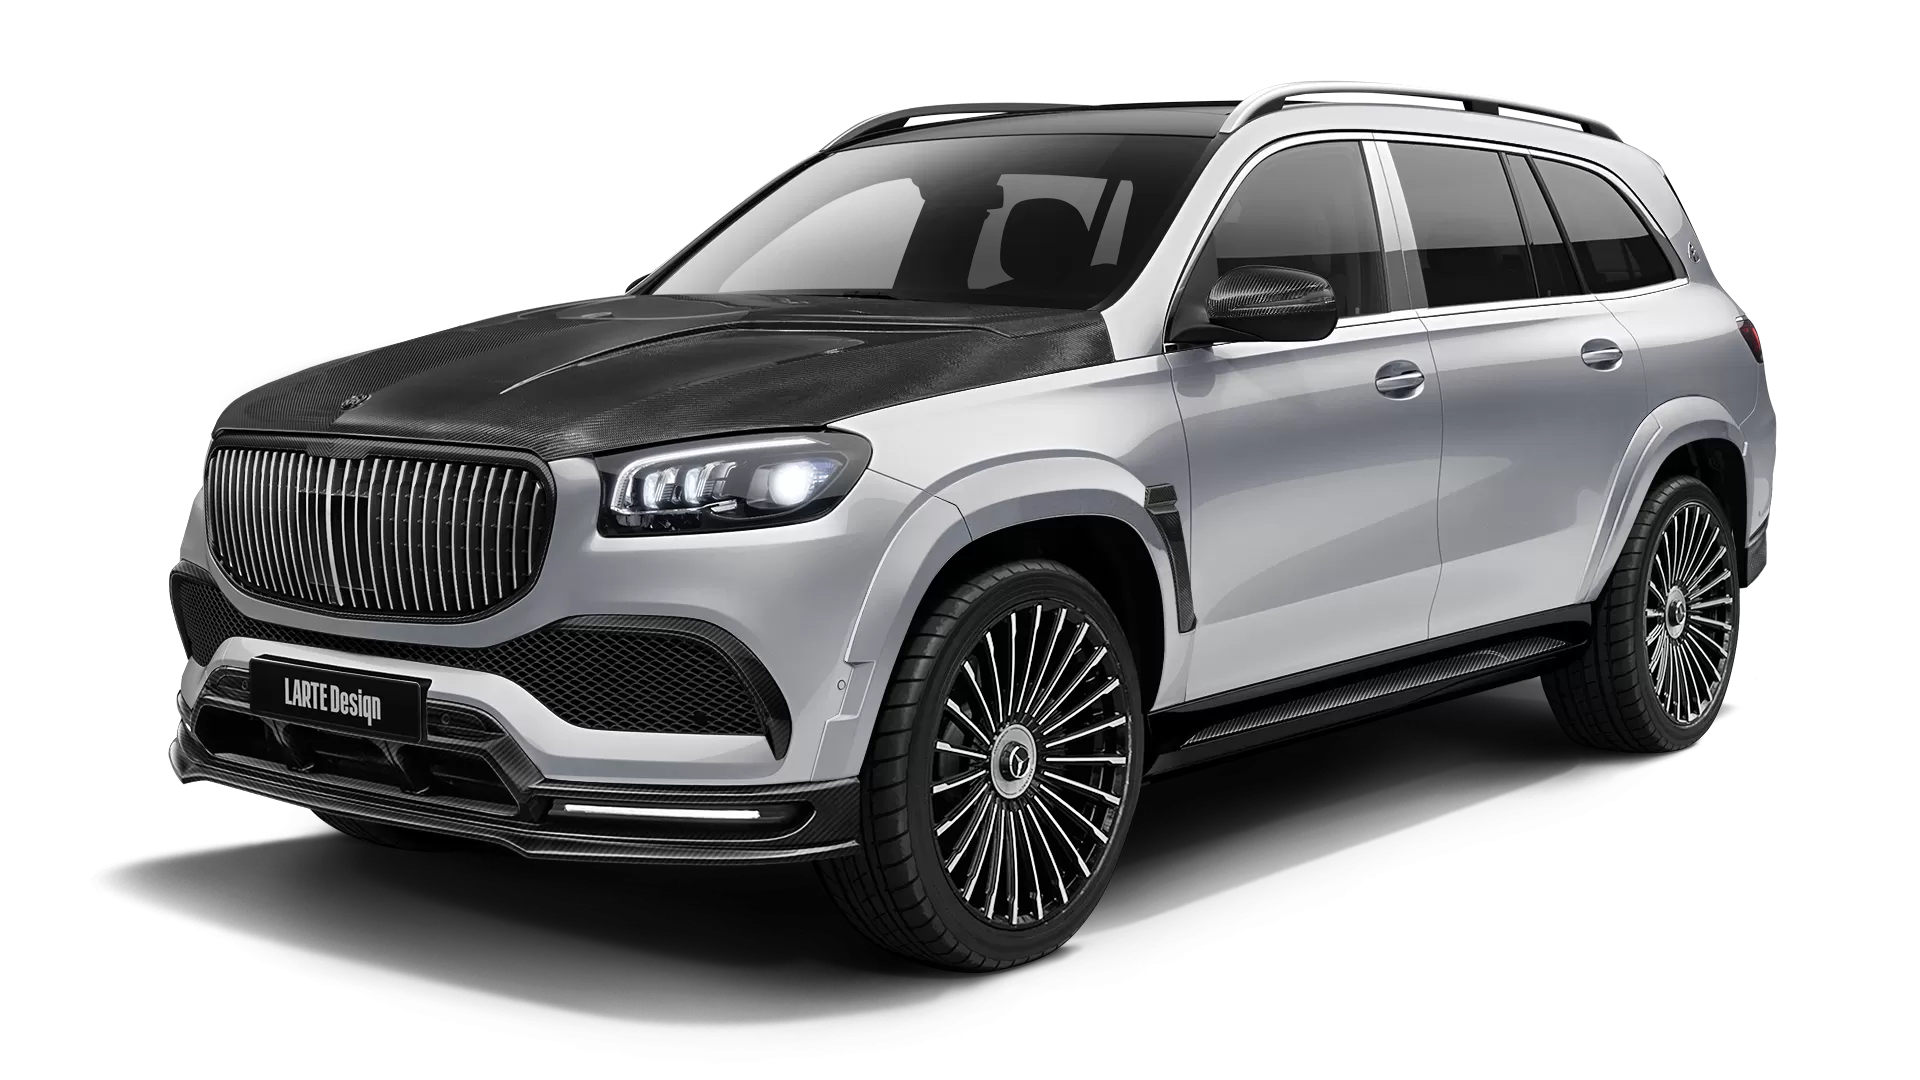 Mercedes Maybach GLS 600 with carbon body kit: front view shown in High Tech Silver